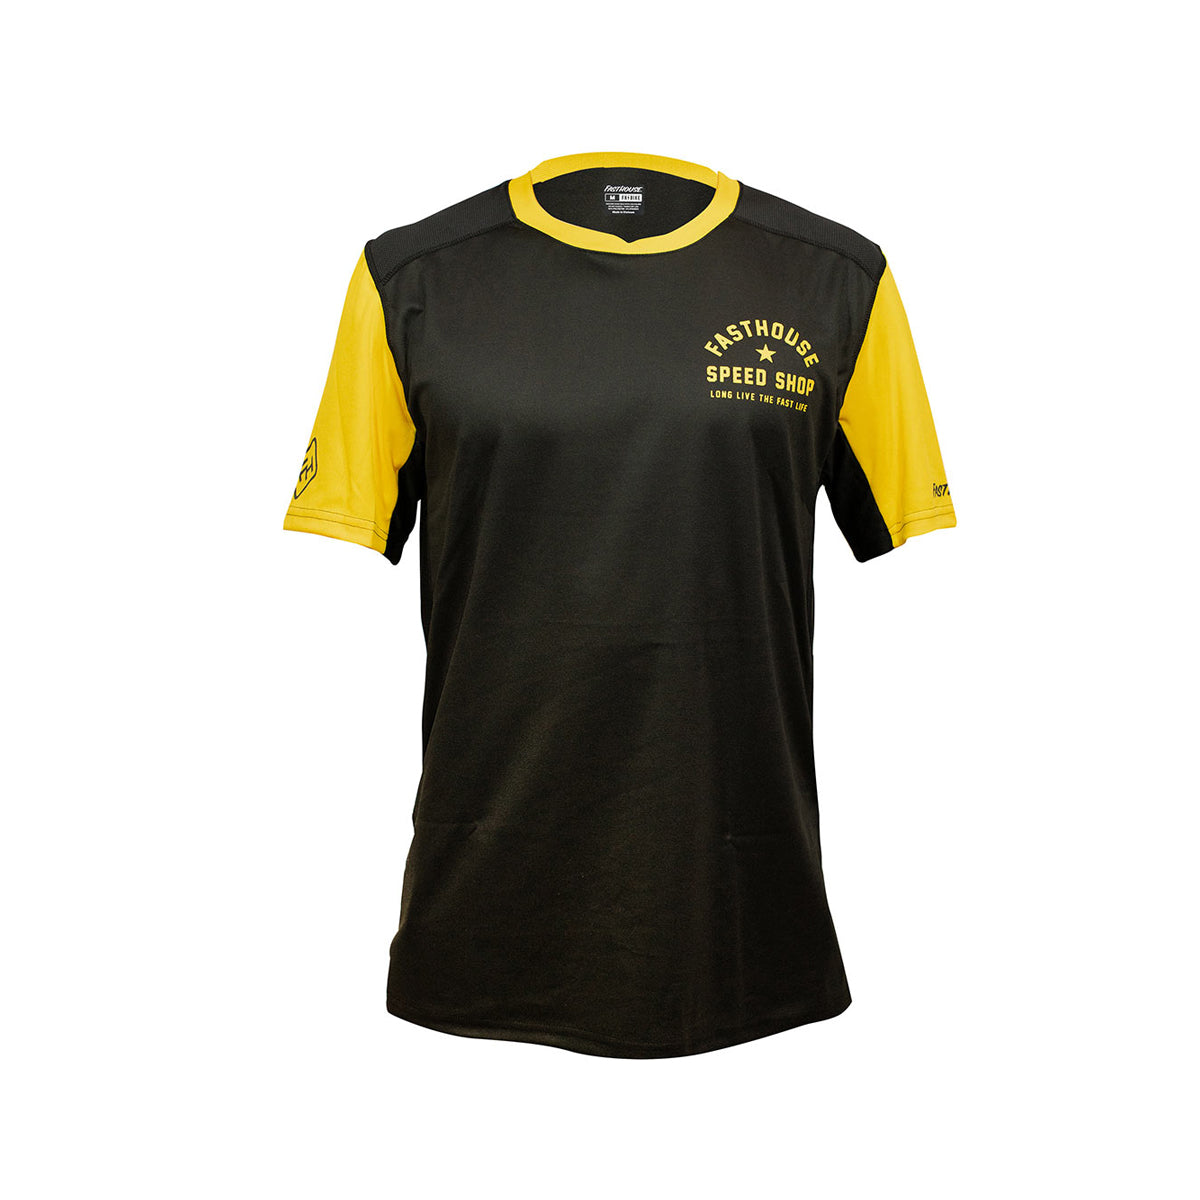 Alloy Star SS Youth Jersey - Black/Gold